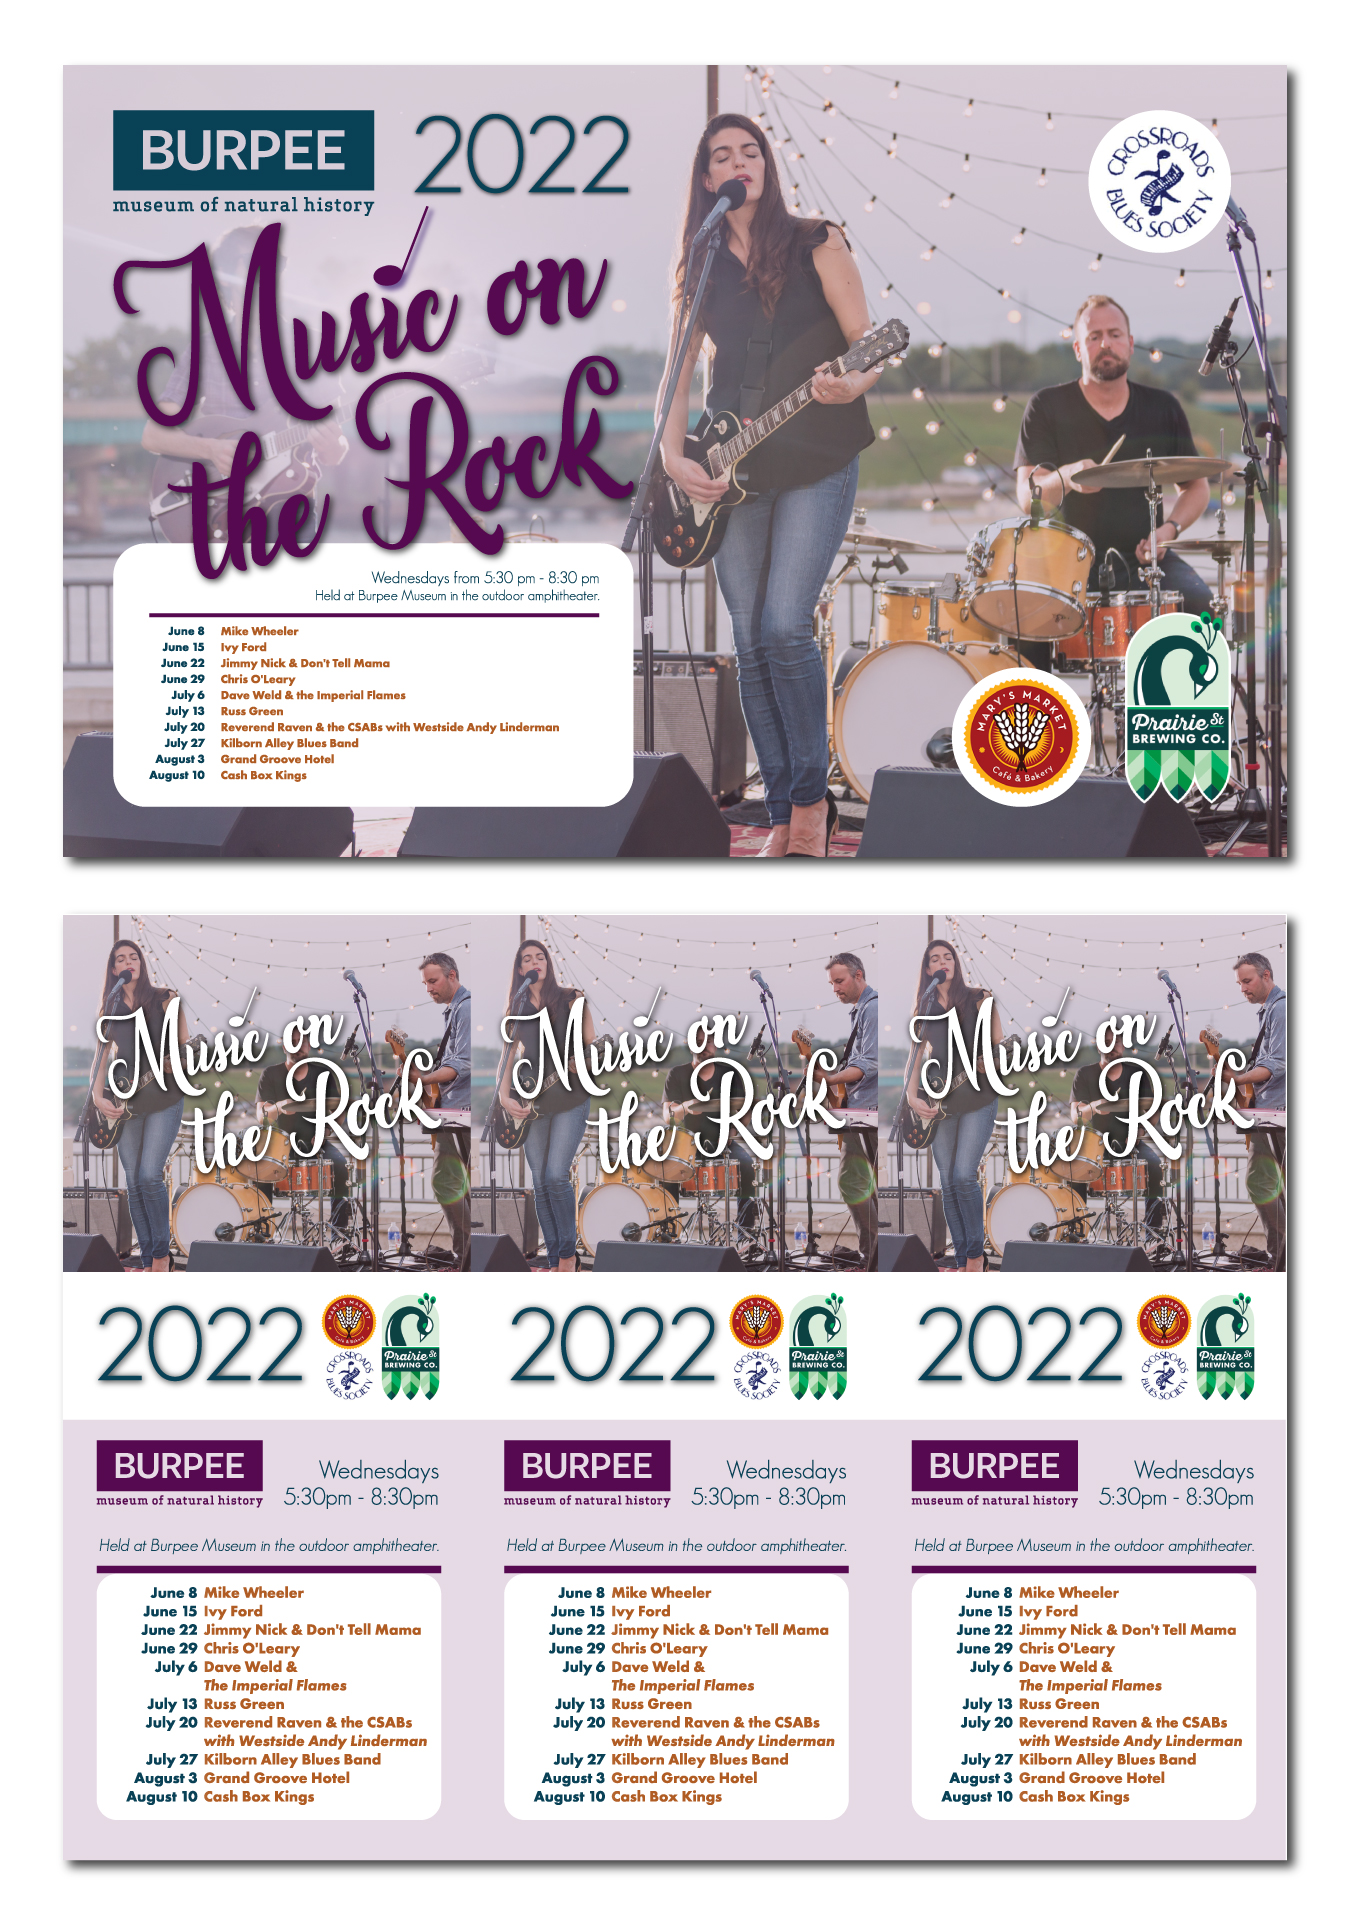 Music on the Rock 2022